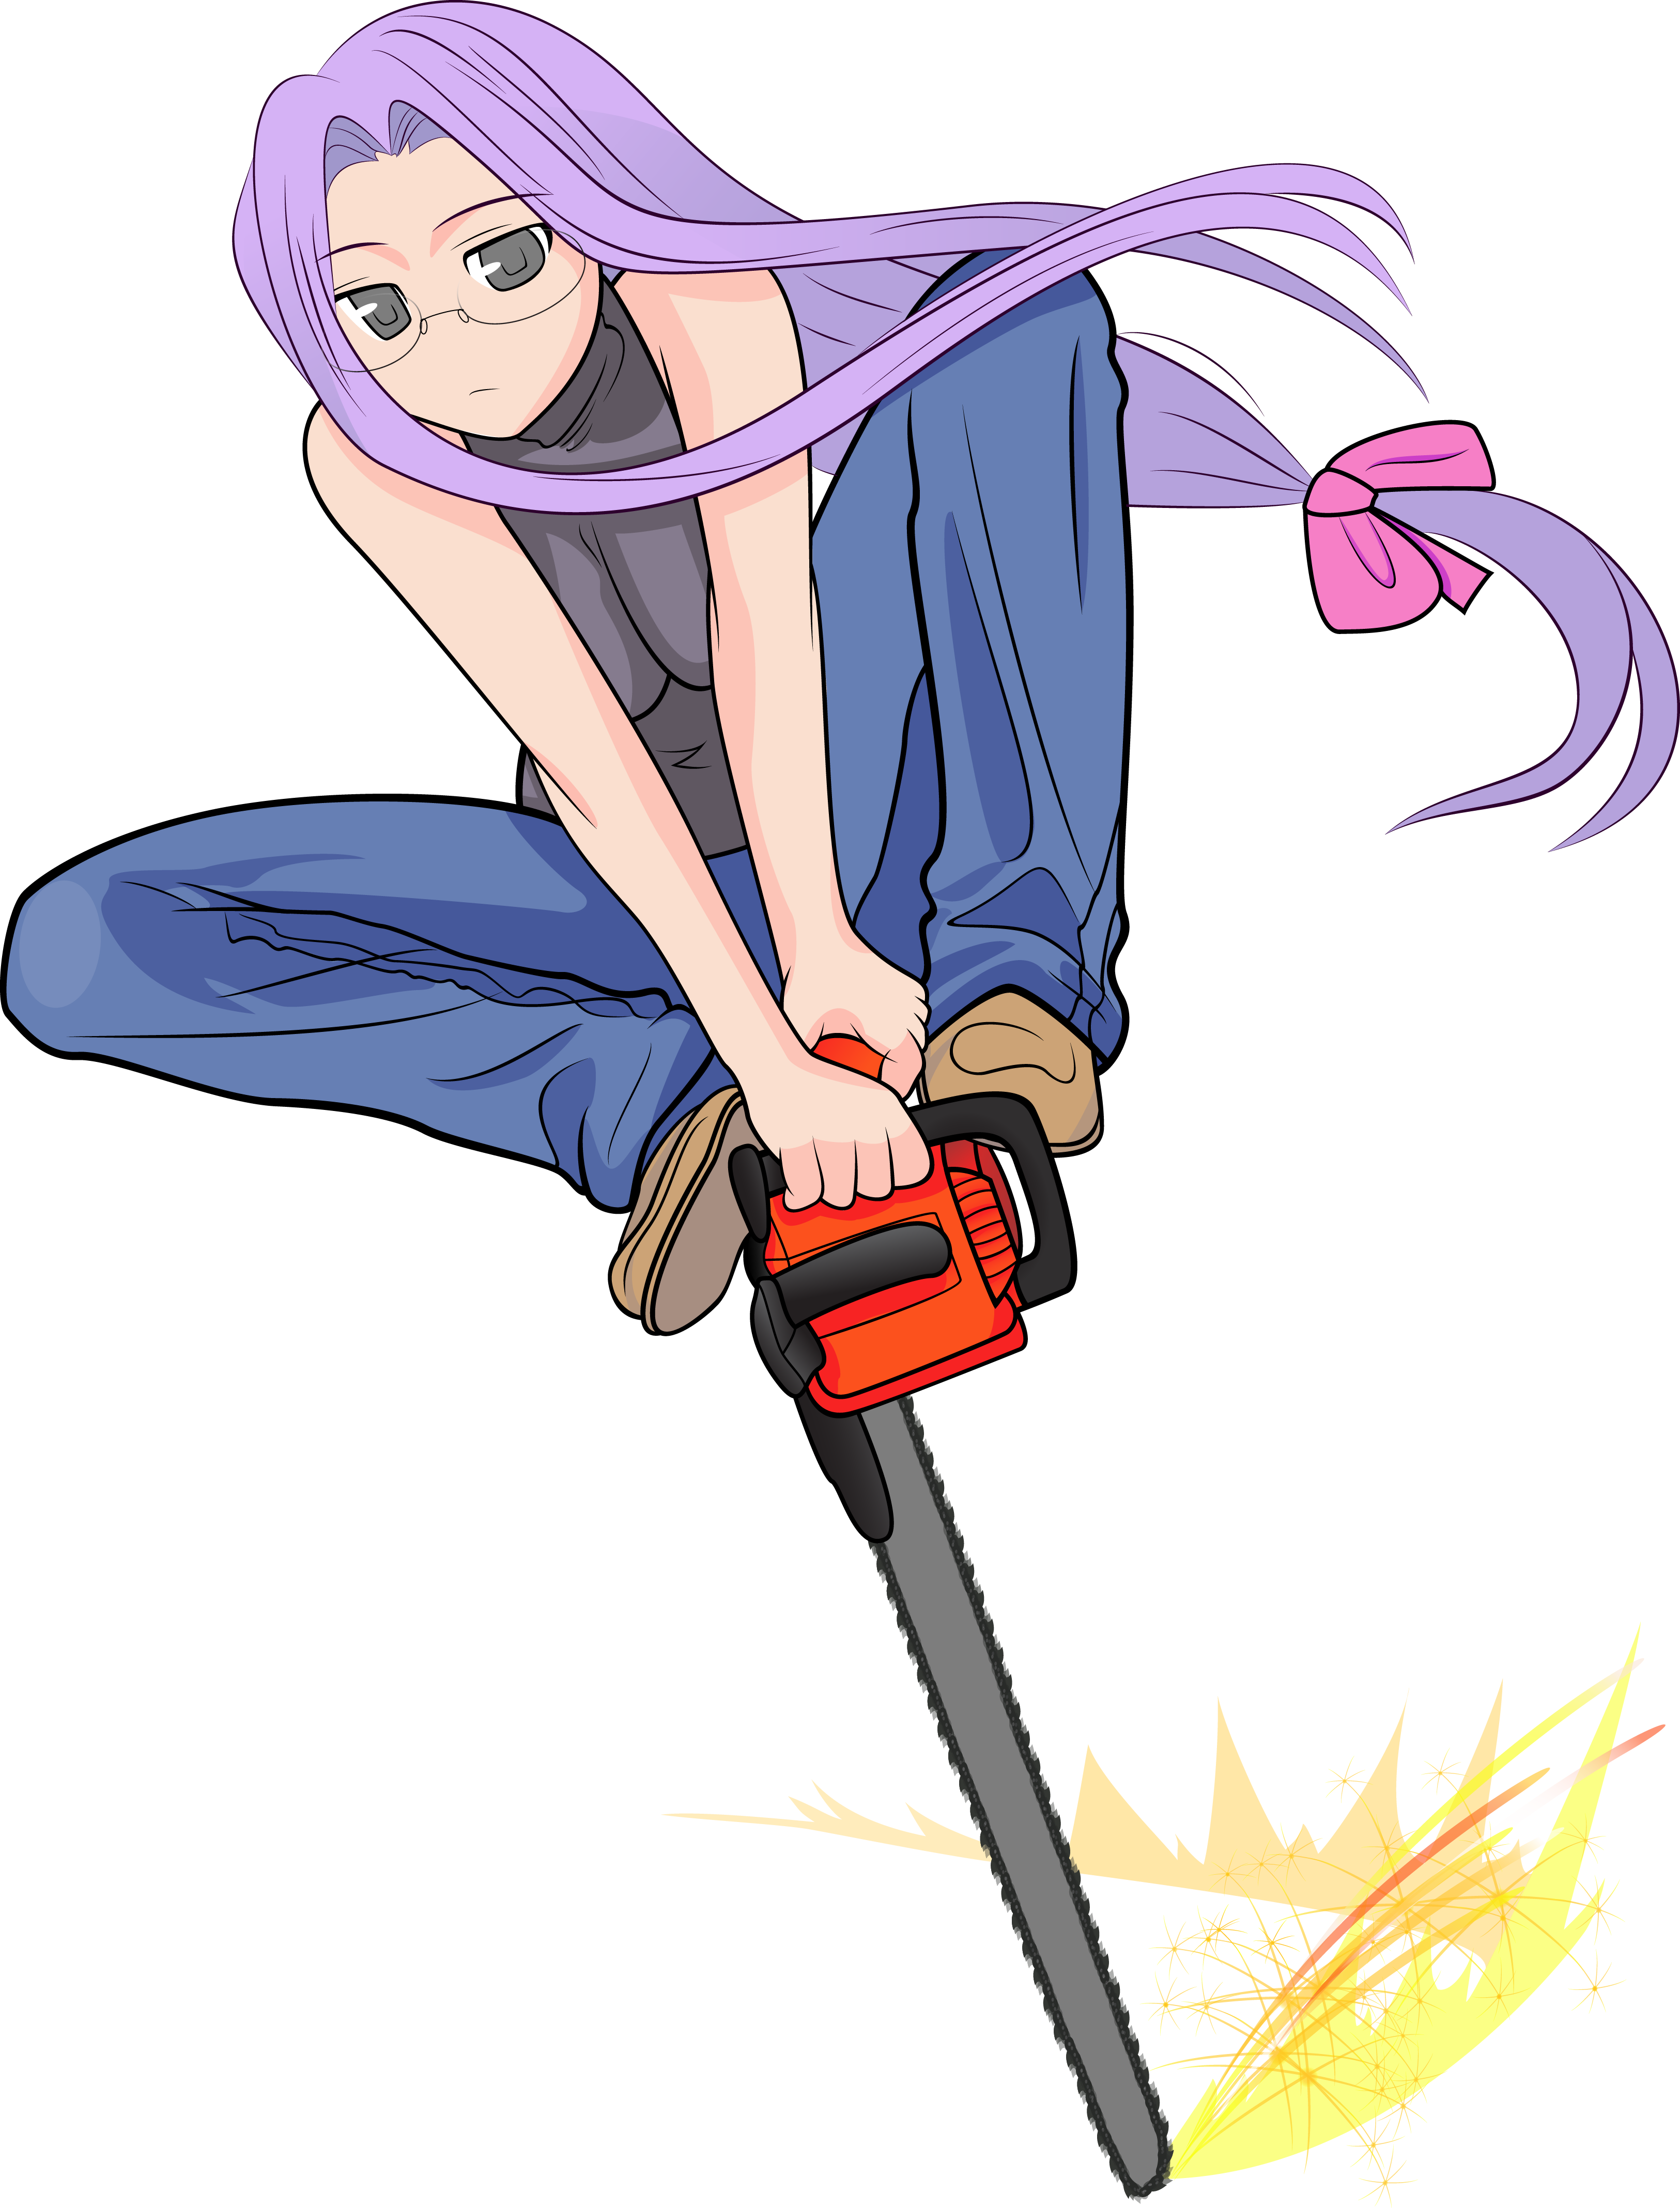 rider_riding_a_chainsaw_by_derpy_answers-d7ngyii